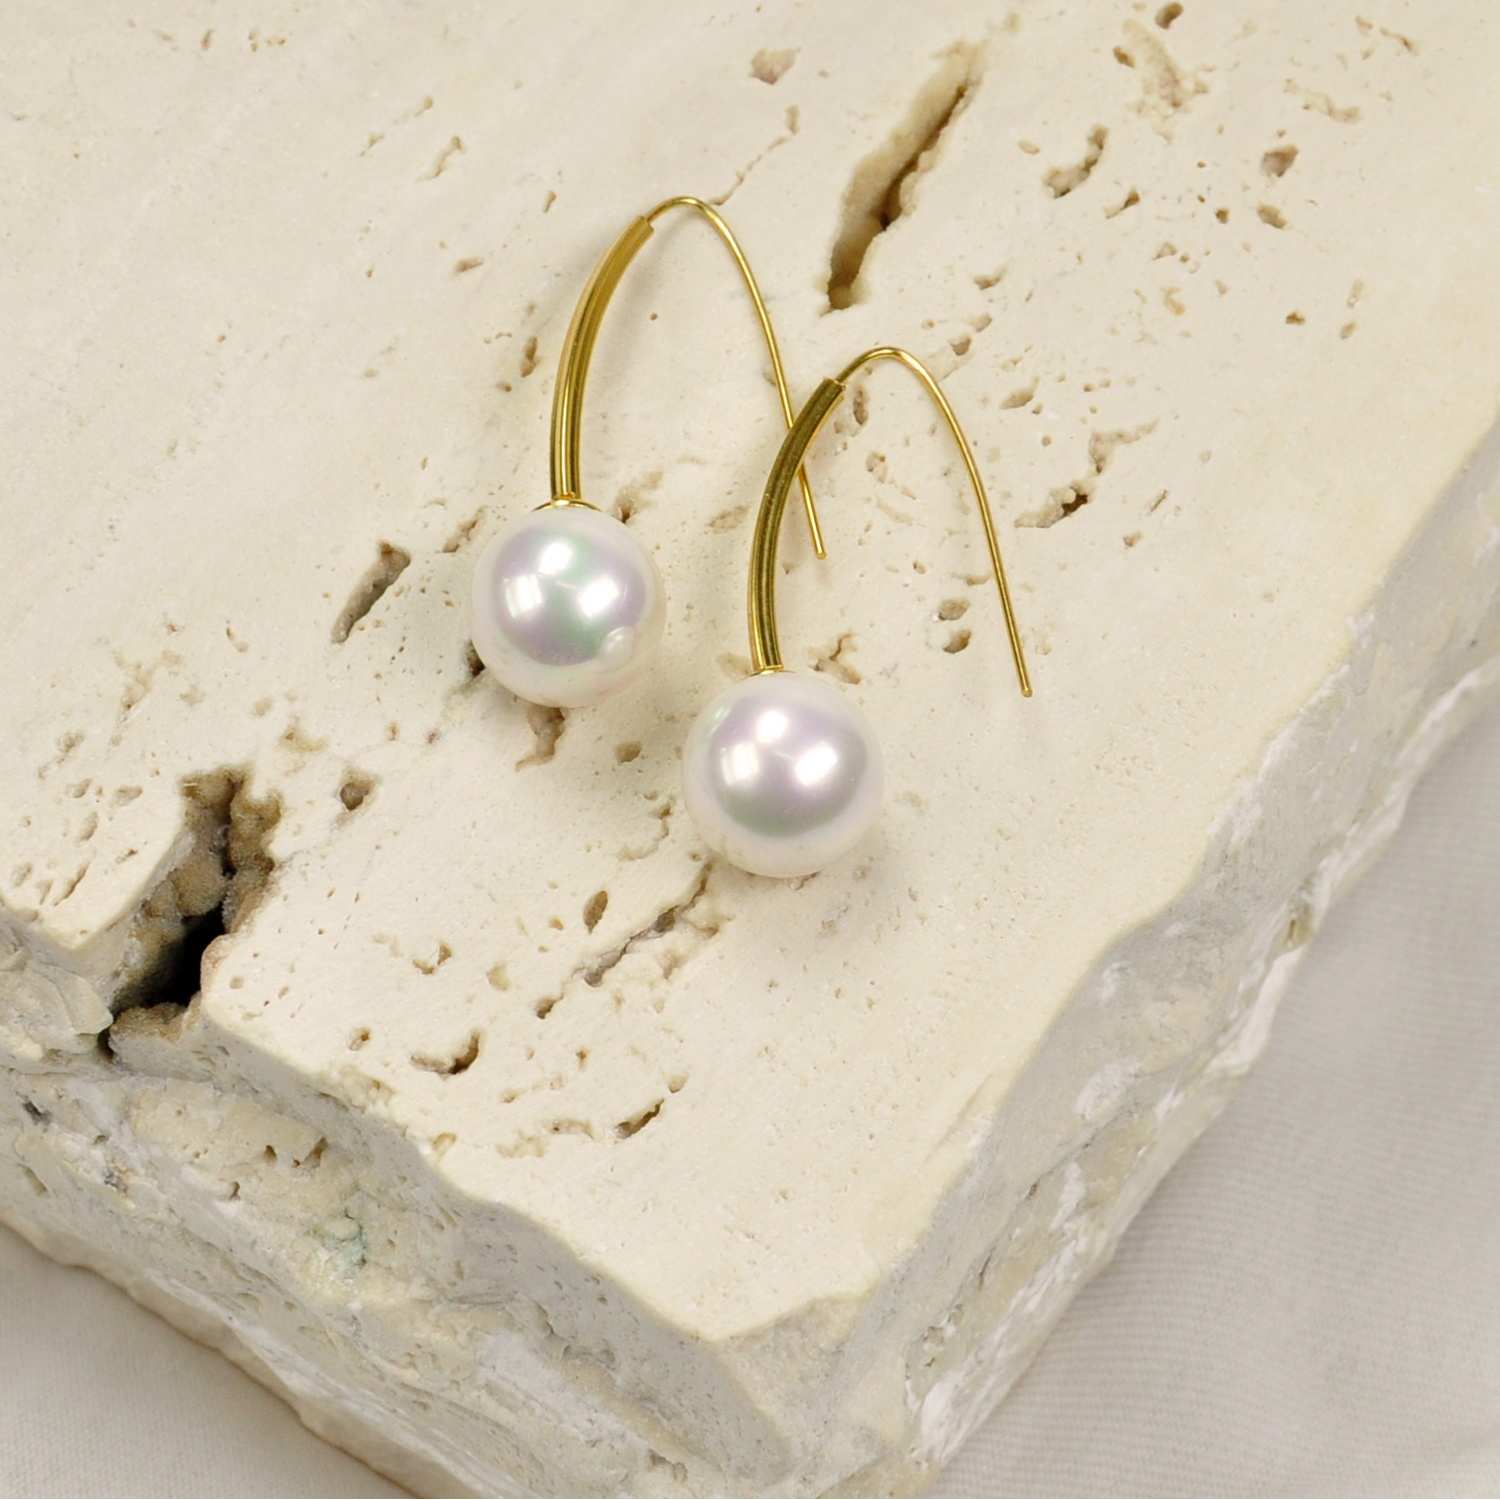 18 carat goldplated Sterling Silver Earrings with white Pearls 1